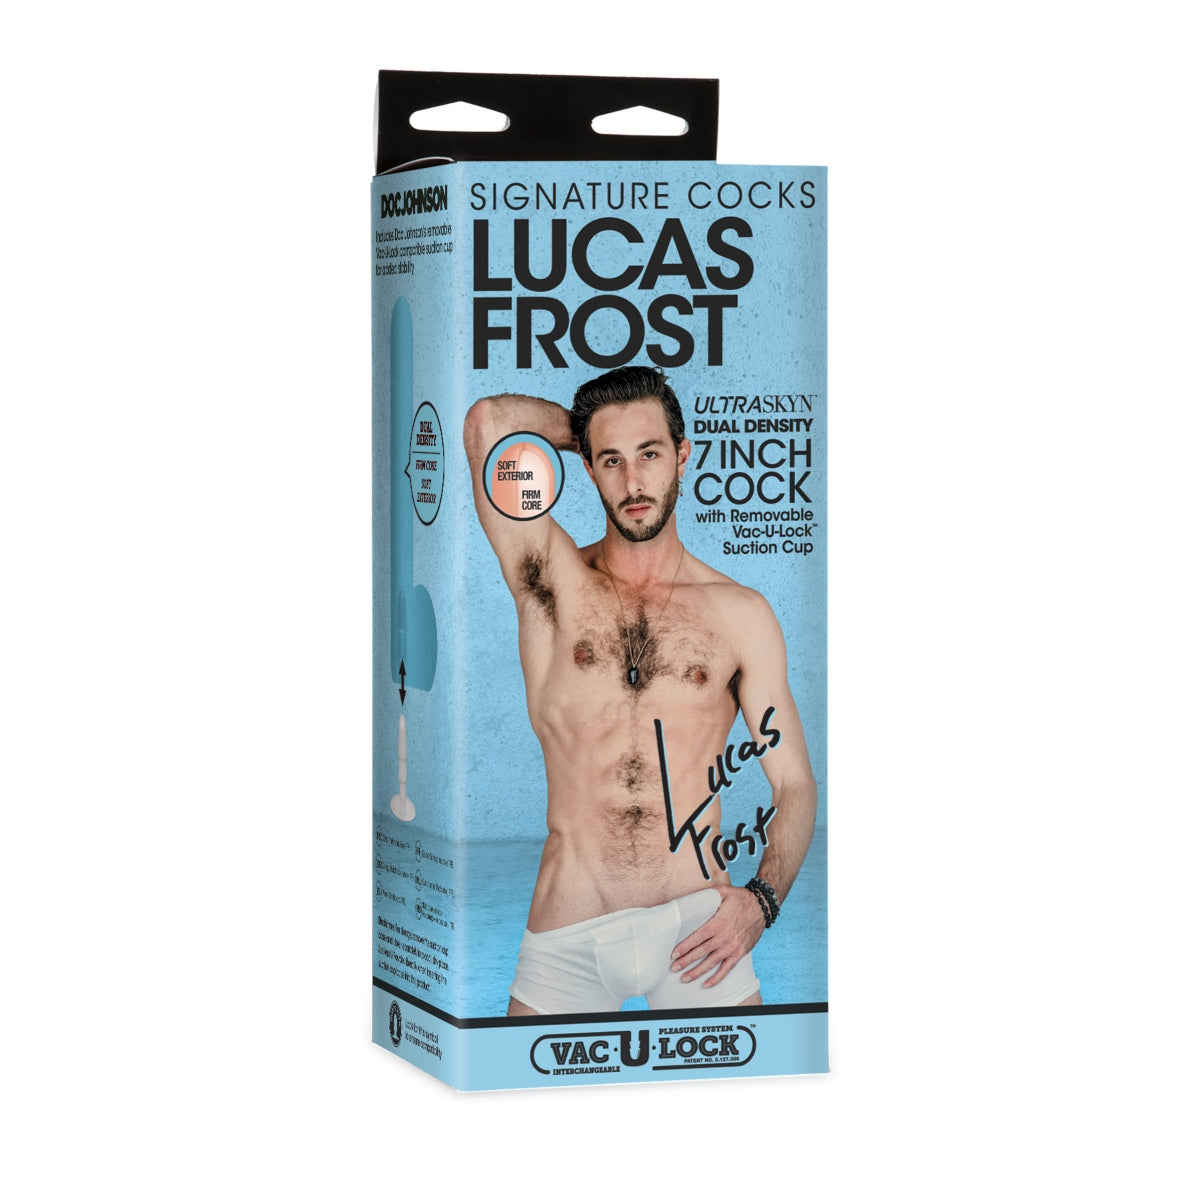 Signature Cocks | Lucas Frost 7inch Ultraskyn Cock with Removable Vac U Lock Suction Cup – Vanilla